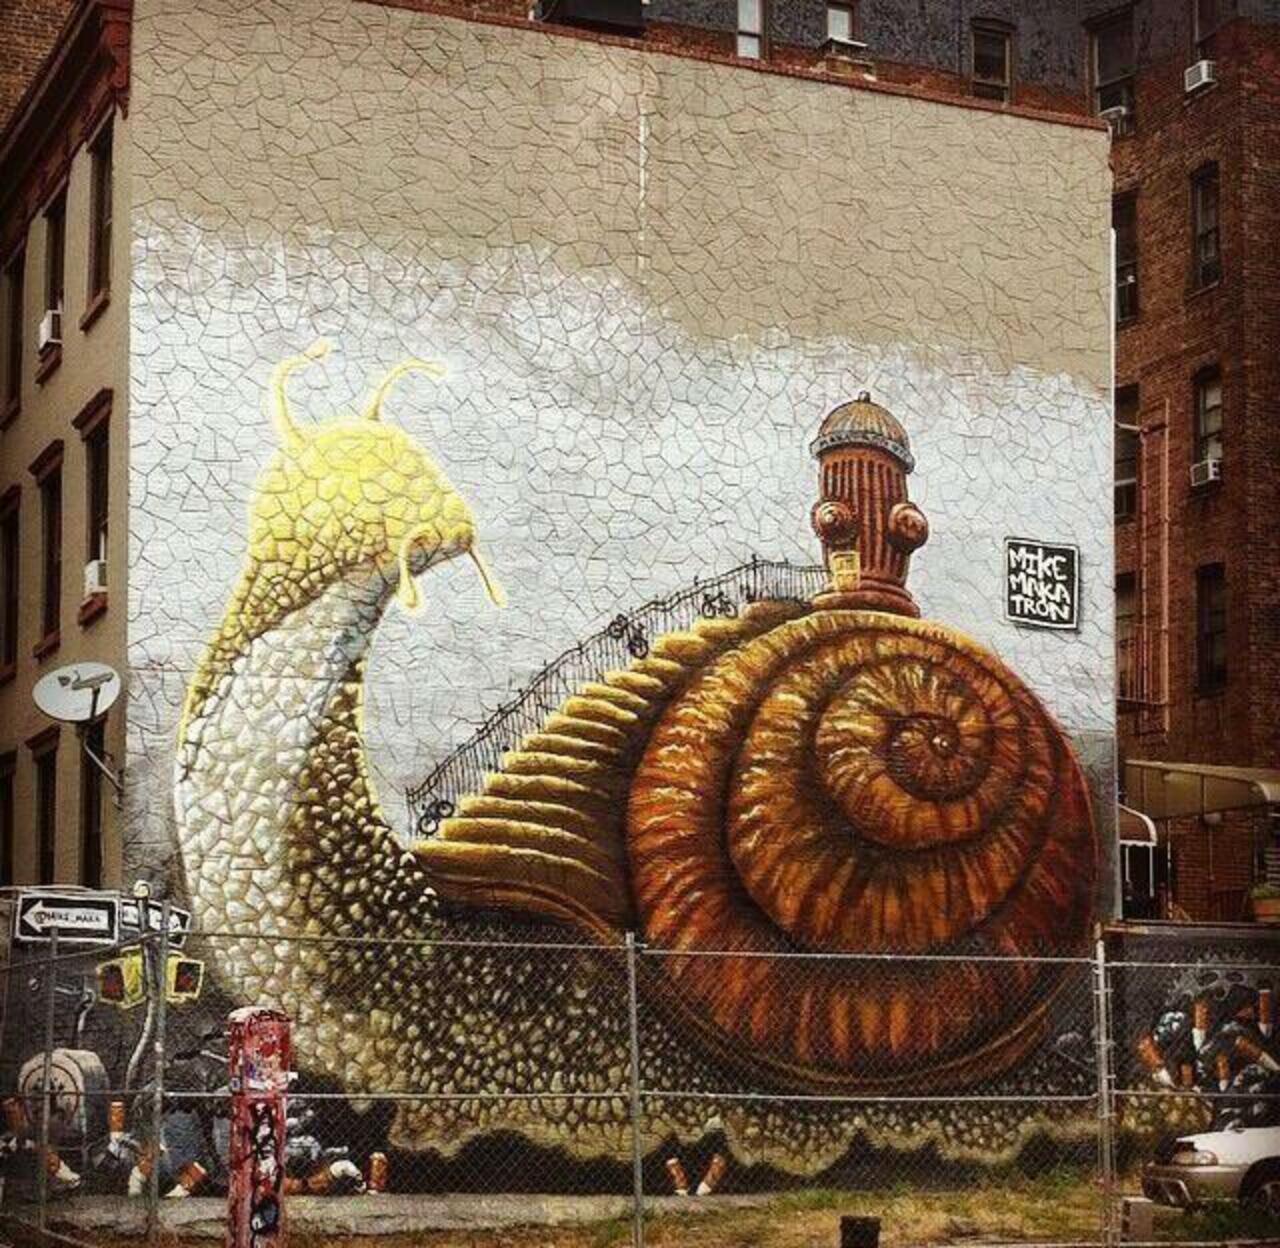 Artist Mike Makatron fantastic large scale Street Art located in Brooklyn, NY #art #graffiti #mural #streetart https://t.co/vpEqFw8O6h